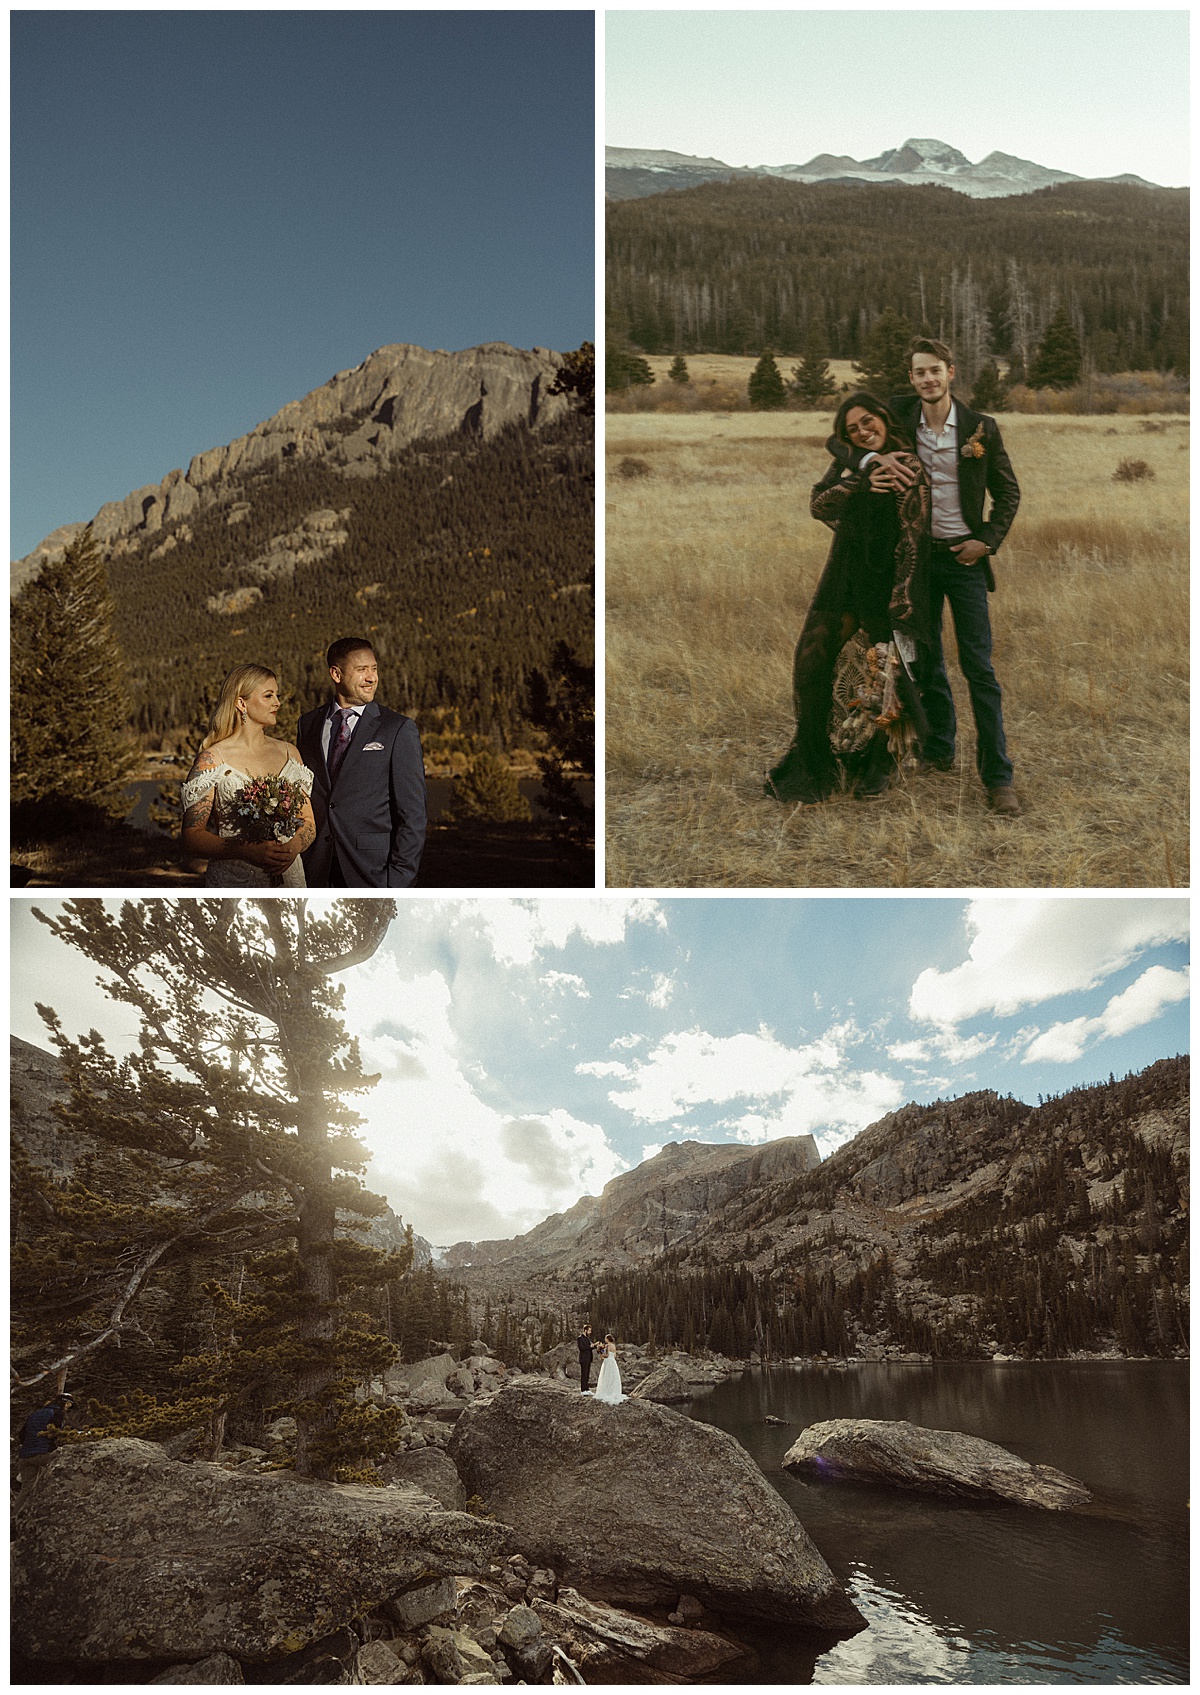 Couples eloping at Rocky Mountain National Park have mountains as their backdrop.